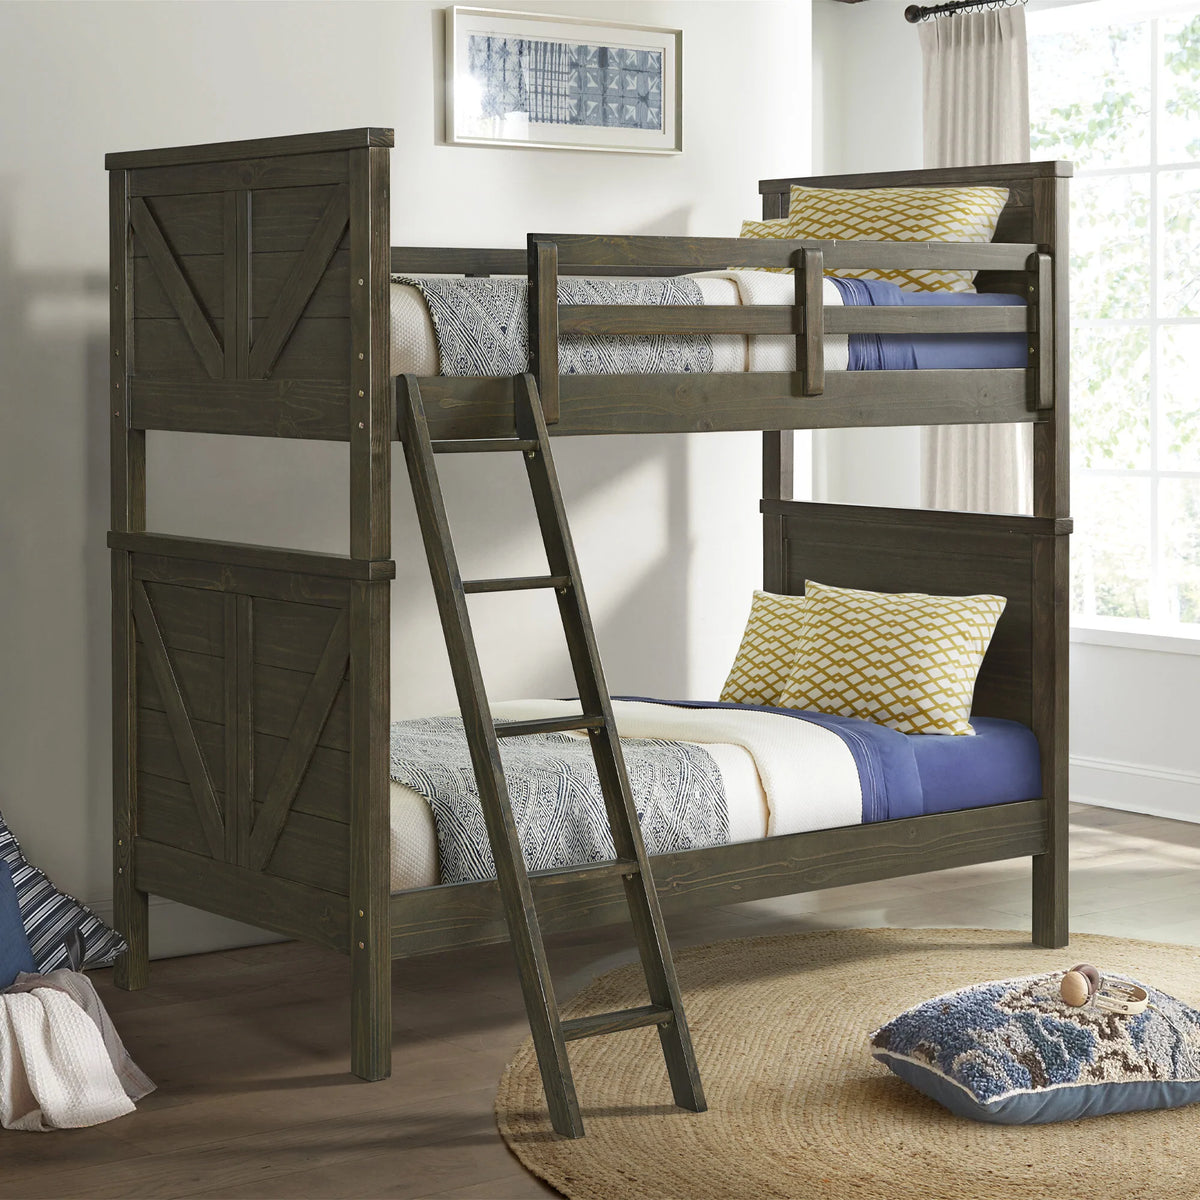 Tahoe Youth Bunk Bed (Twin/Twin) River Rock